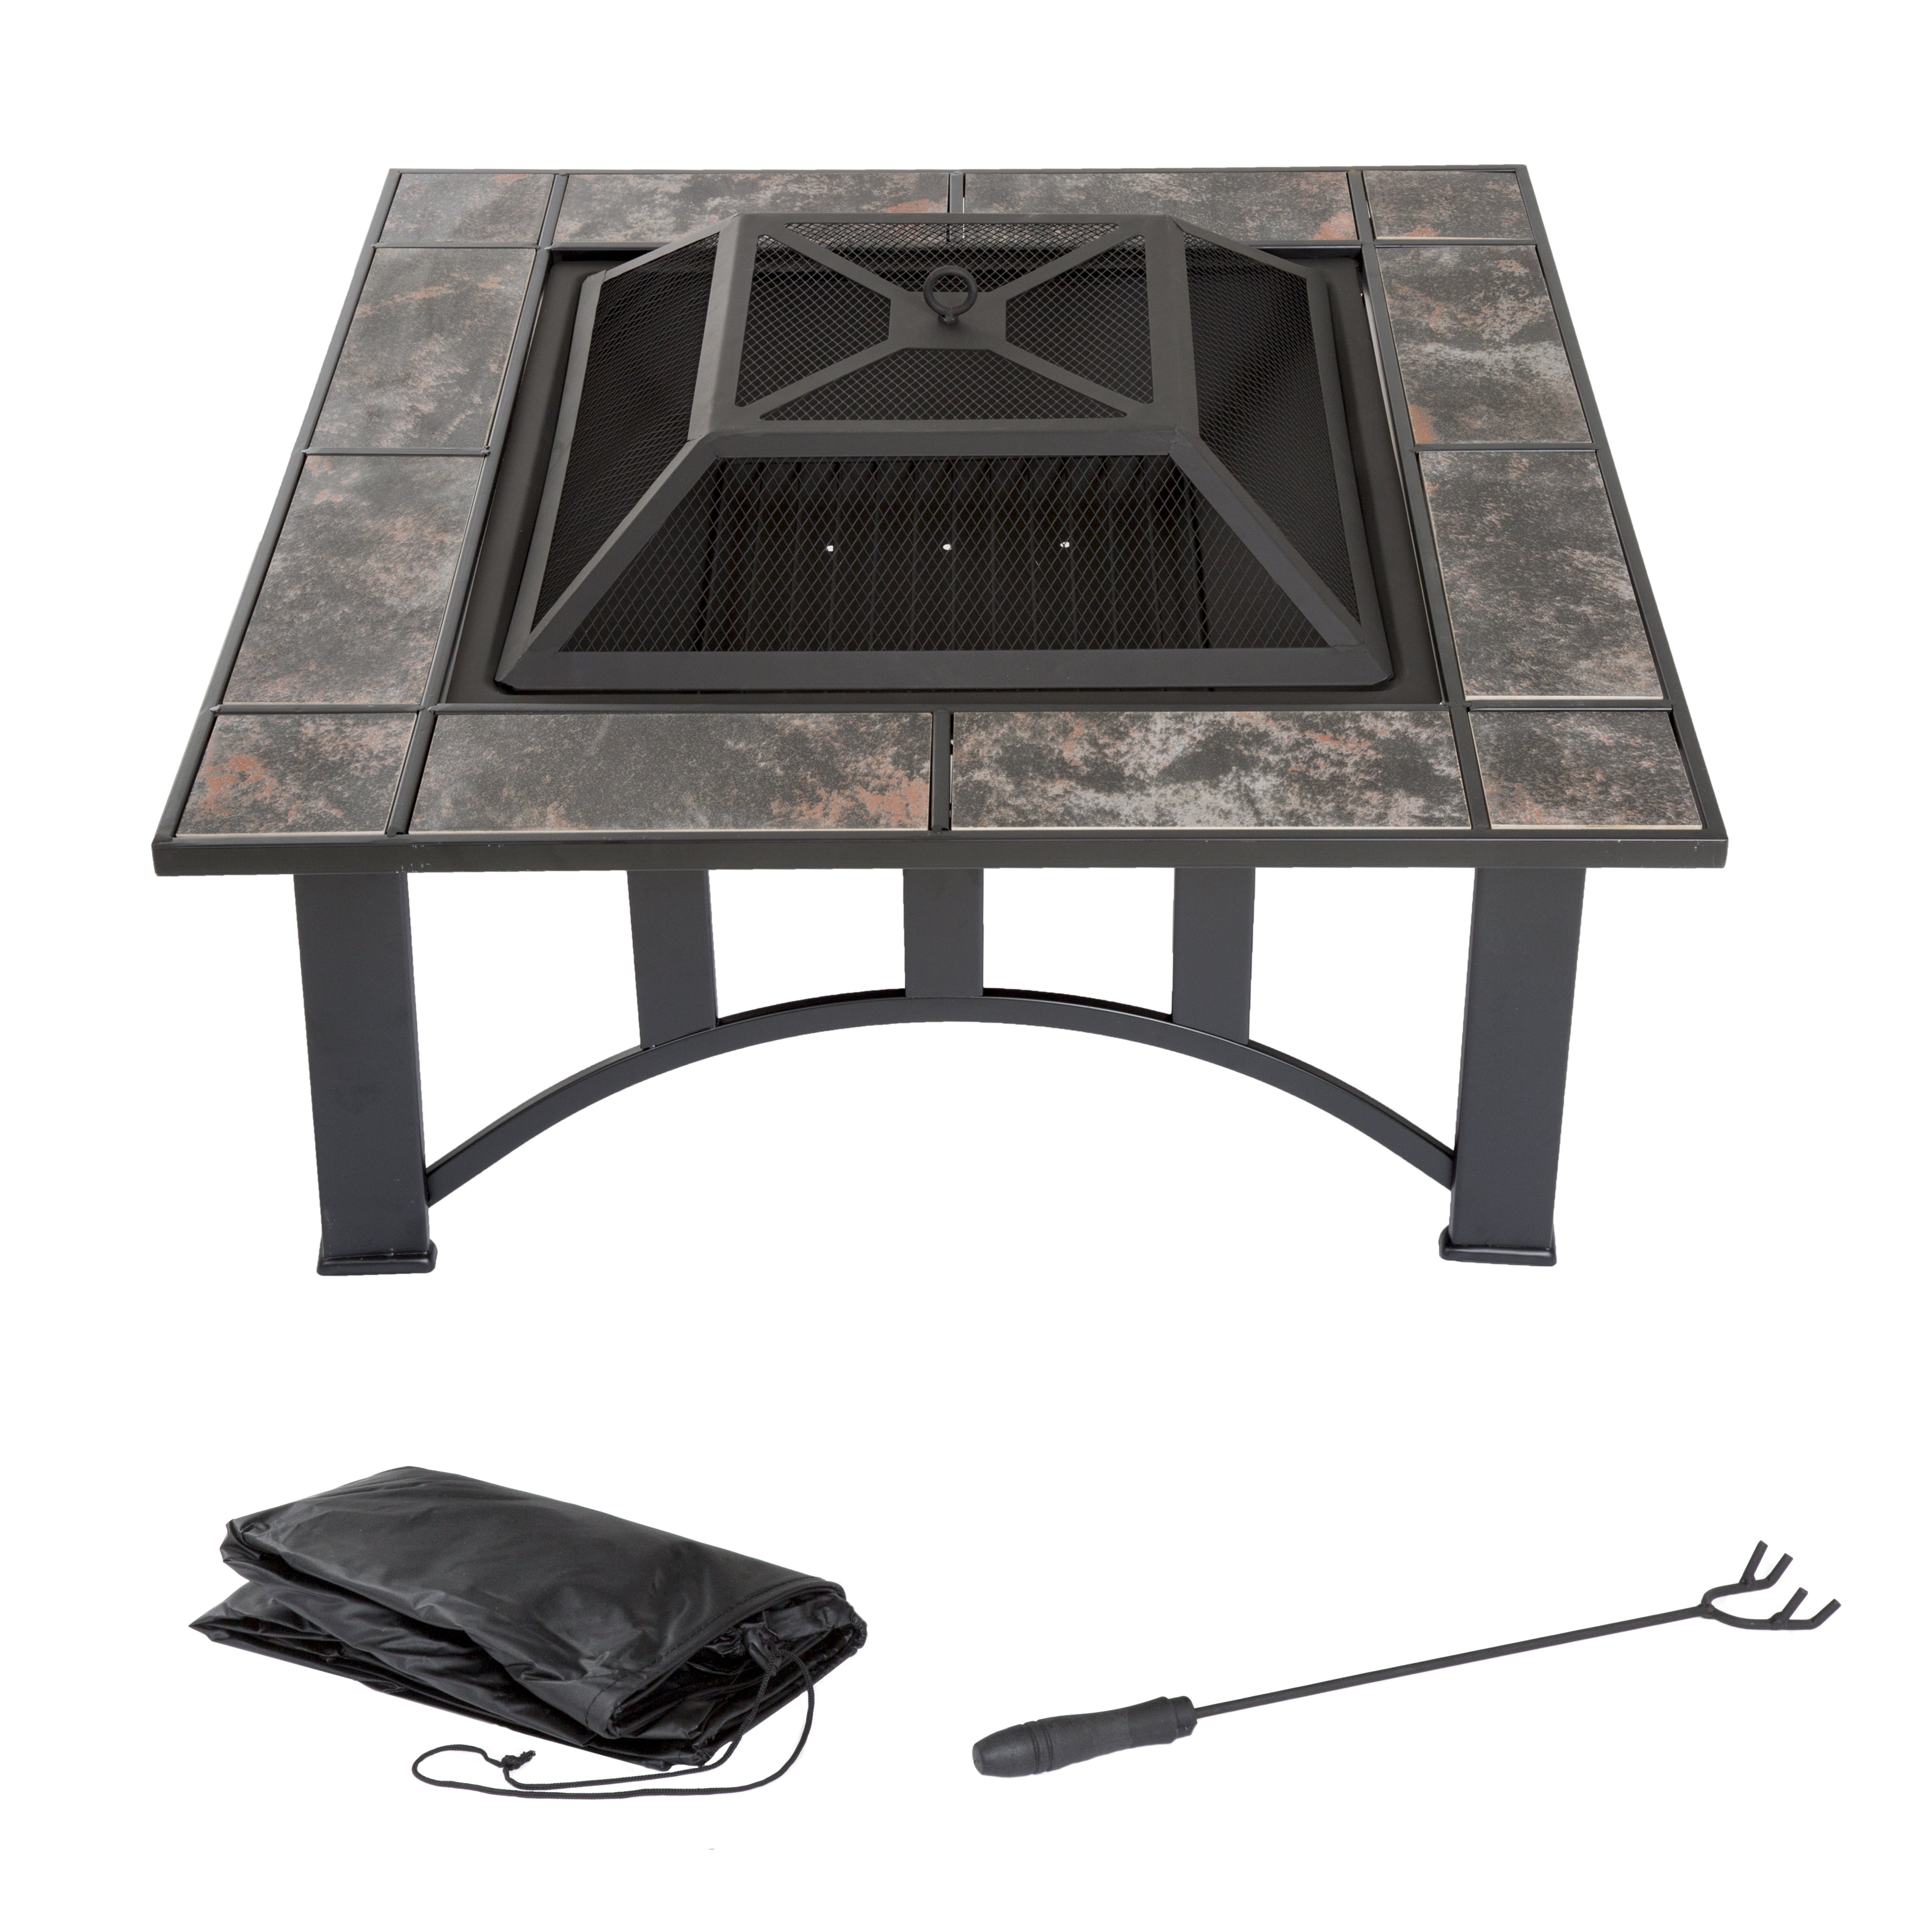 Great for Outdoor and Patio Includes Screen Wood Burning Pit Cover and Log Poker Fire Pit Set 30 inch Square Marble Tile Firepit by Pure Garden 